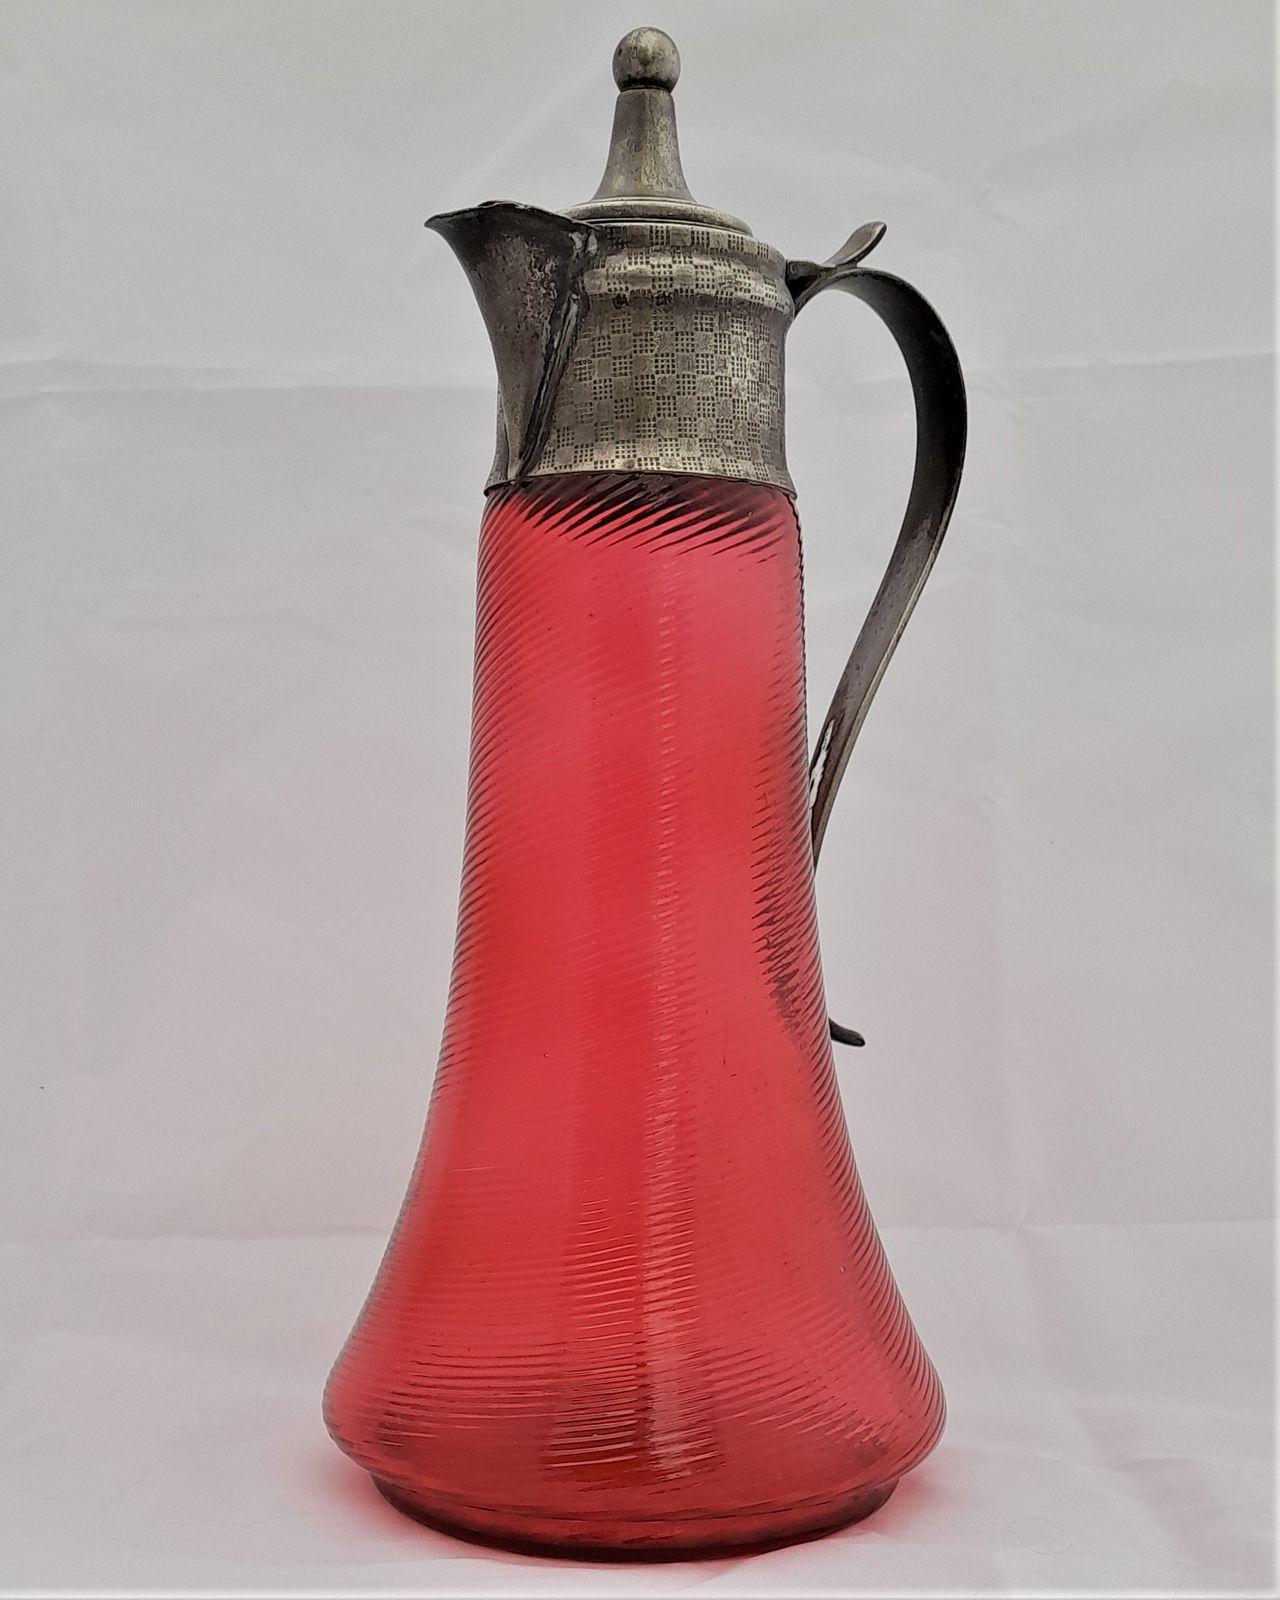 Antique Art Nouveau swirl threaded ruby glass or cranberry glass claret jug with embossed silver plated mounts circa 1900 1 litre capacity.